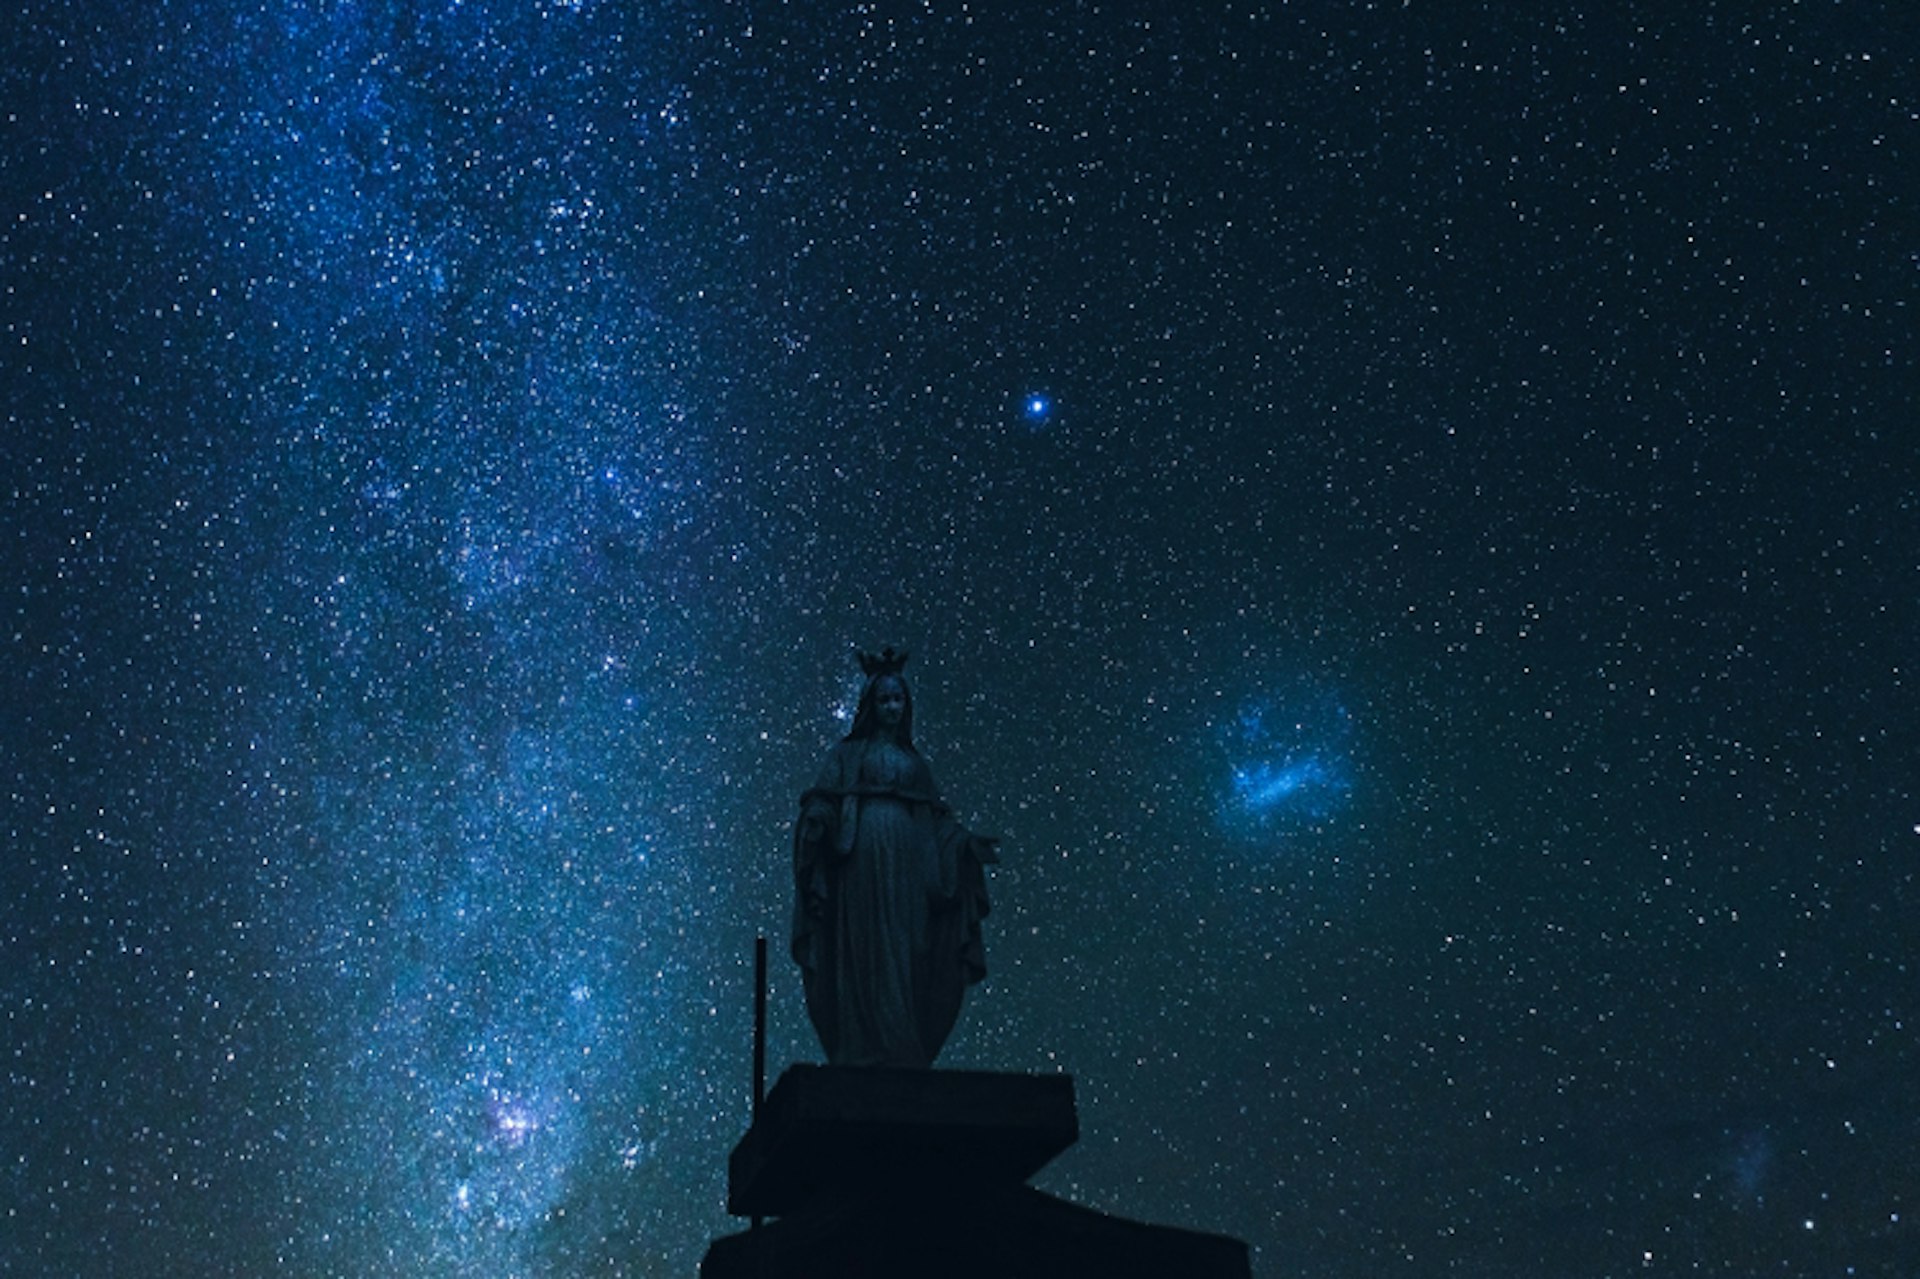 Star gazing at the summit of Mt Ramelou, Timor-Leste. Image by Brian Oh